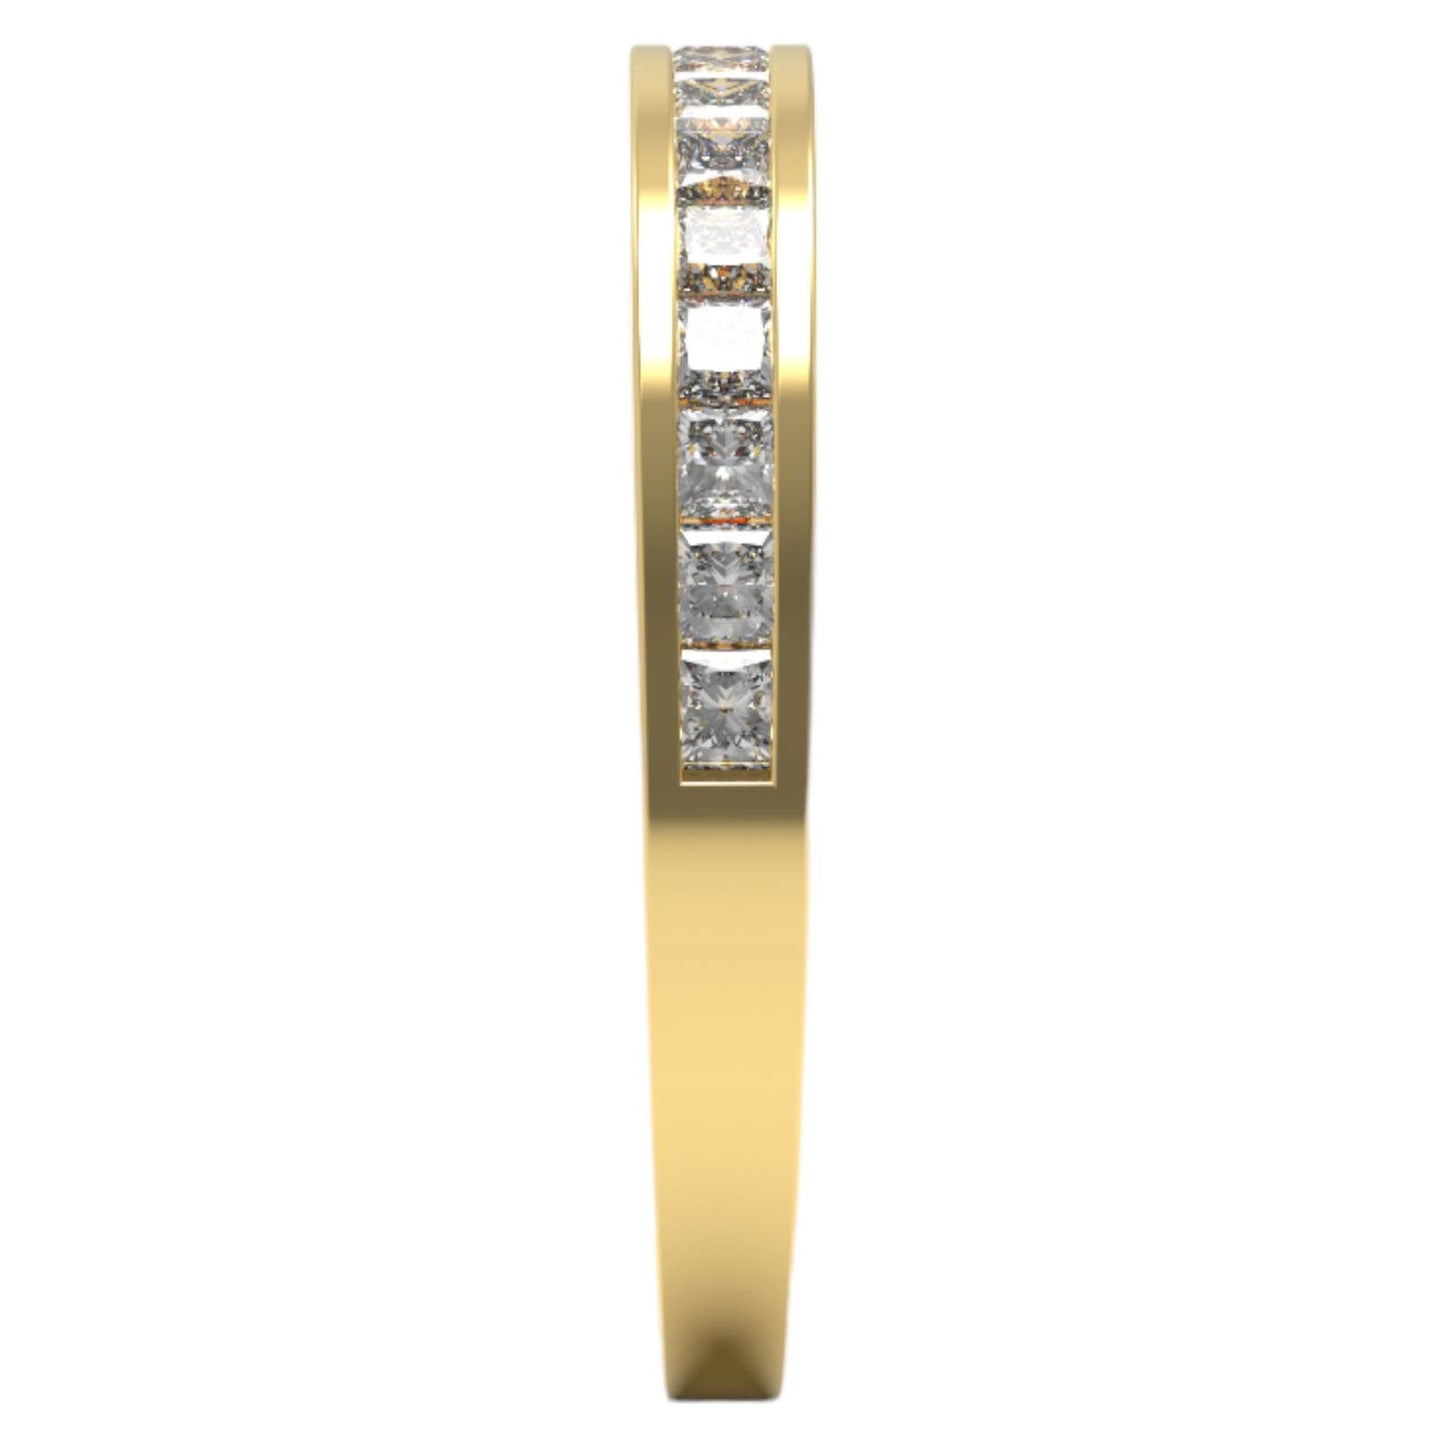 Princess Cut 0.50 Ct Diamond Stackable Ring in 14K Yellow Gold Handmade - Size 7